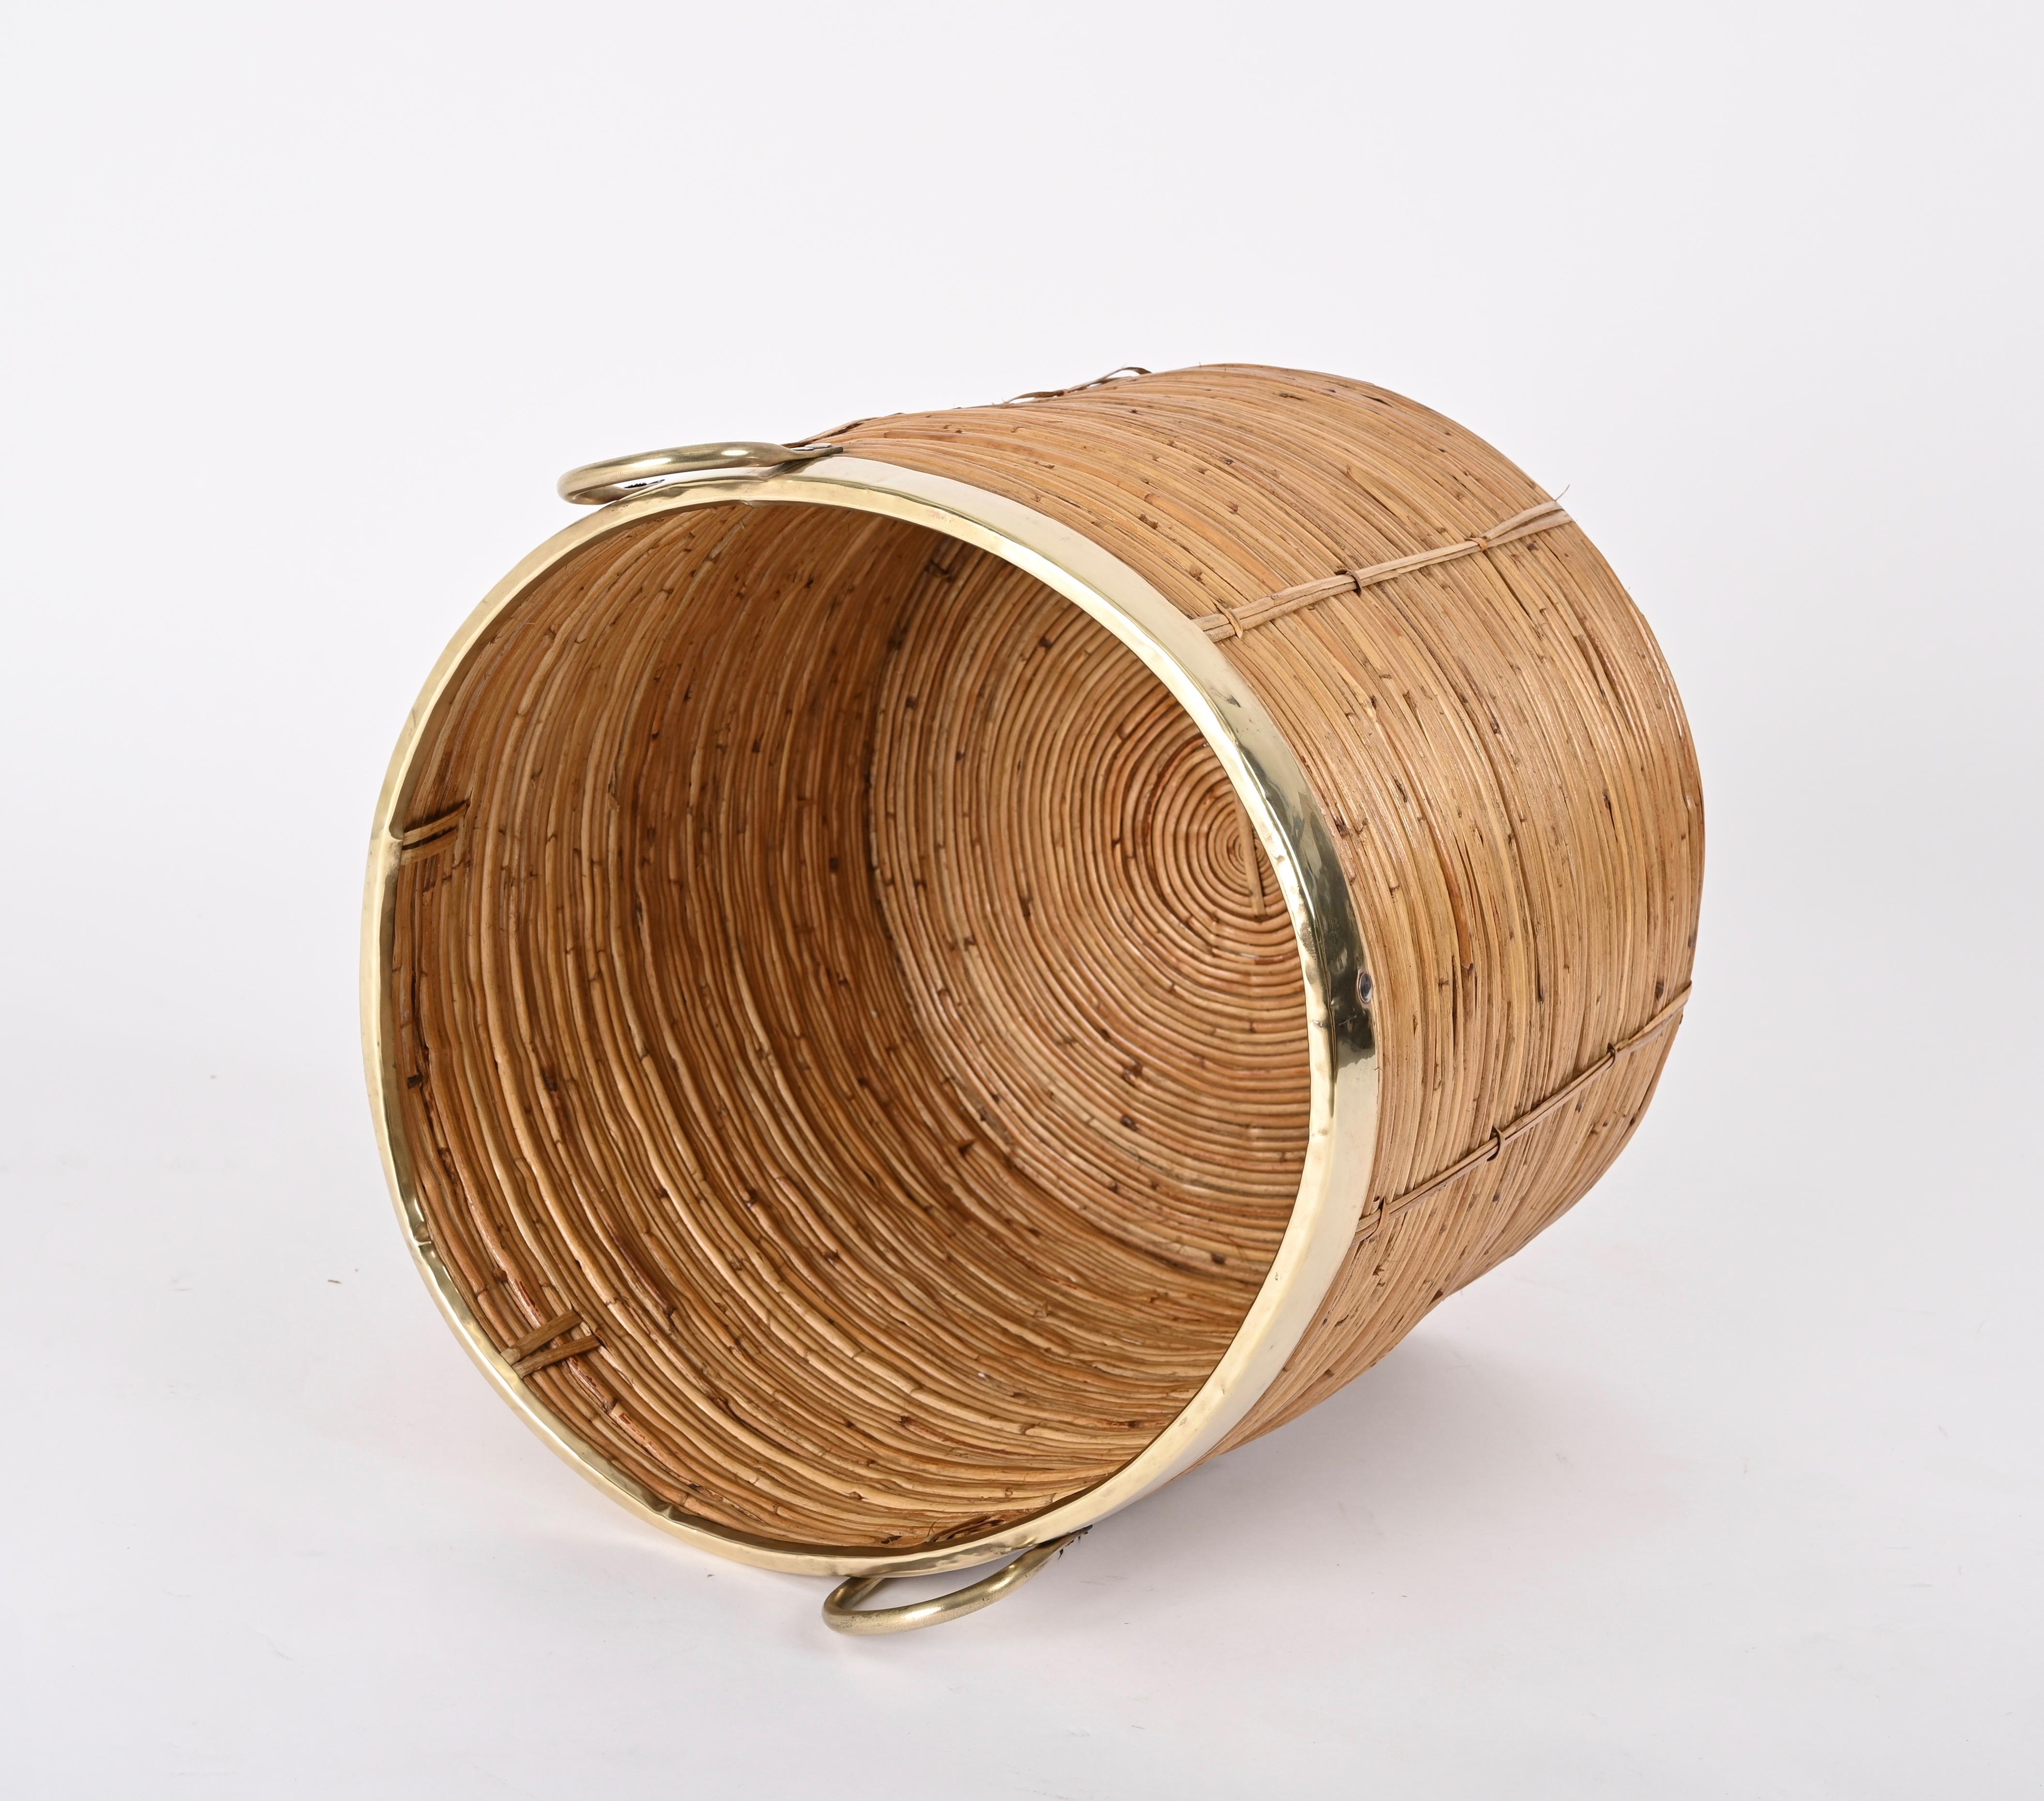 Midcentury Curved Rattan, Brass and Wicker Basket, Vivai del Sud, Italy 1970s For Sale 7